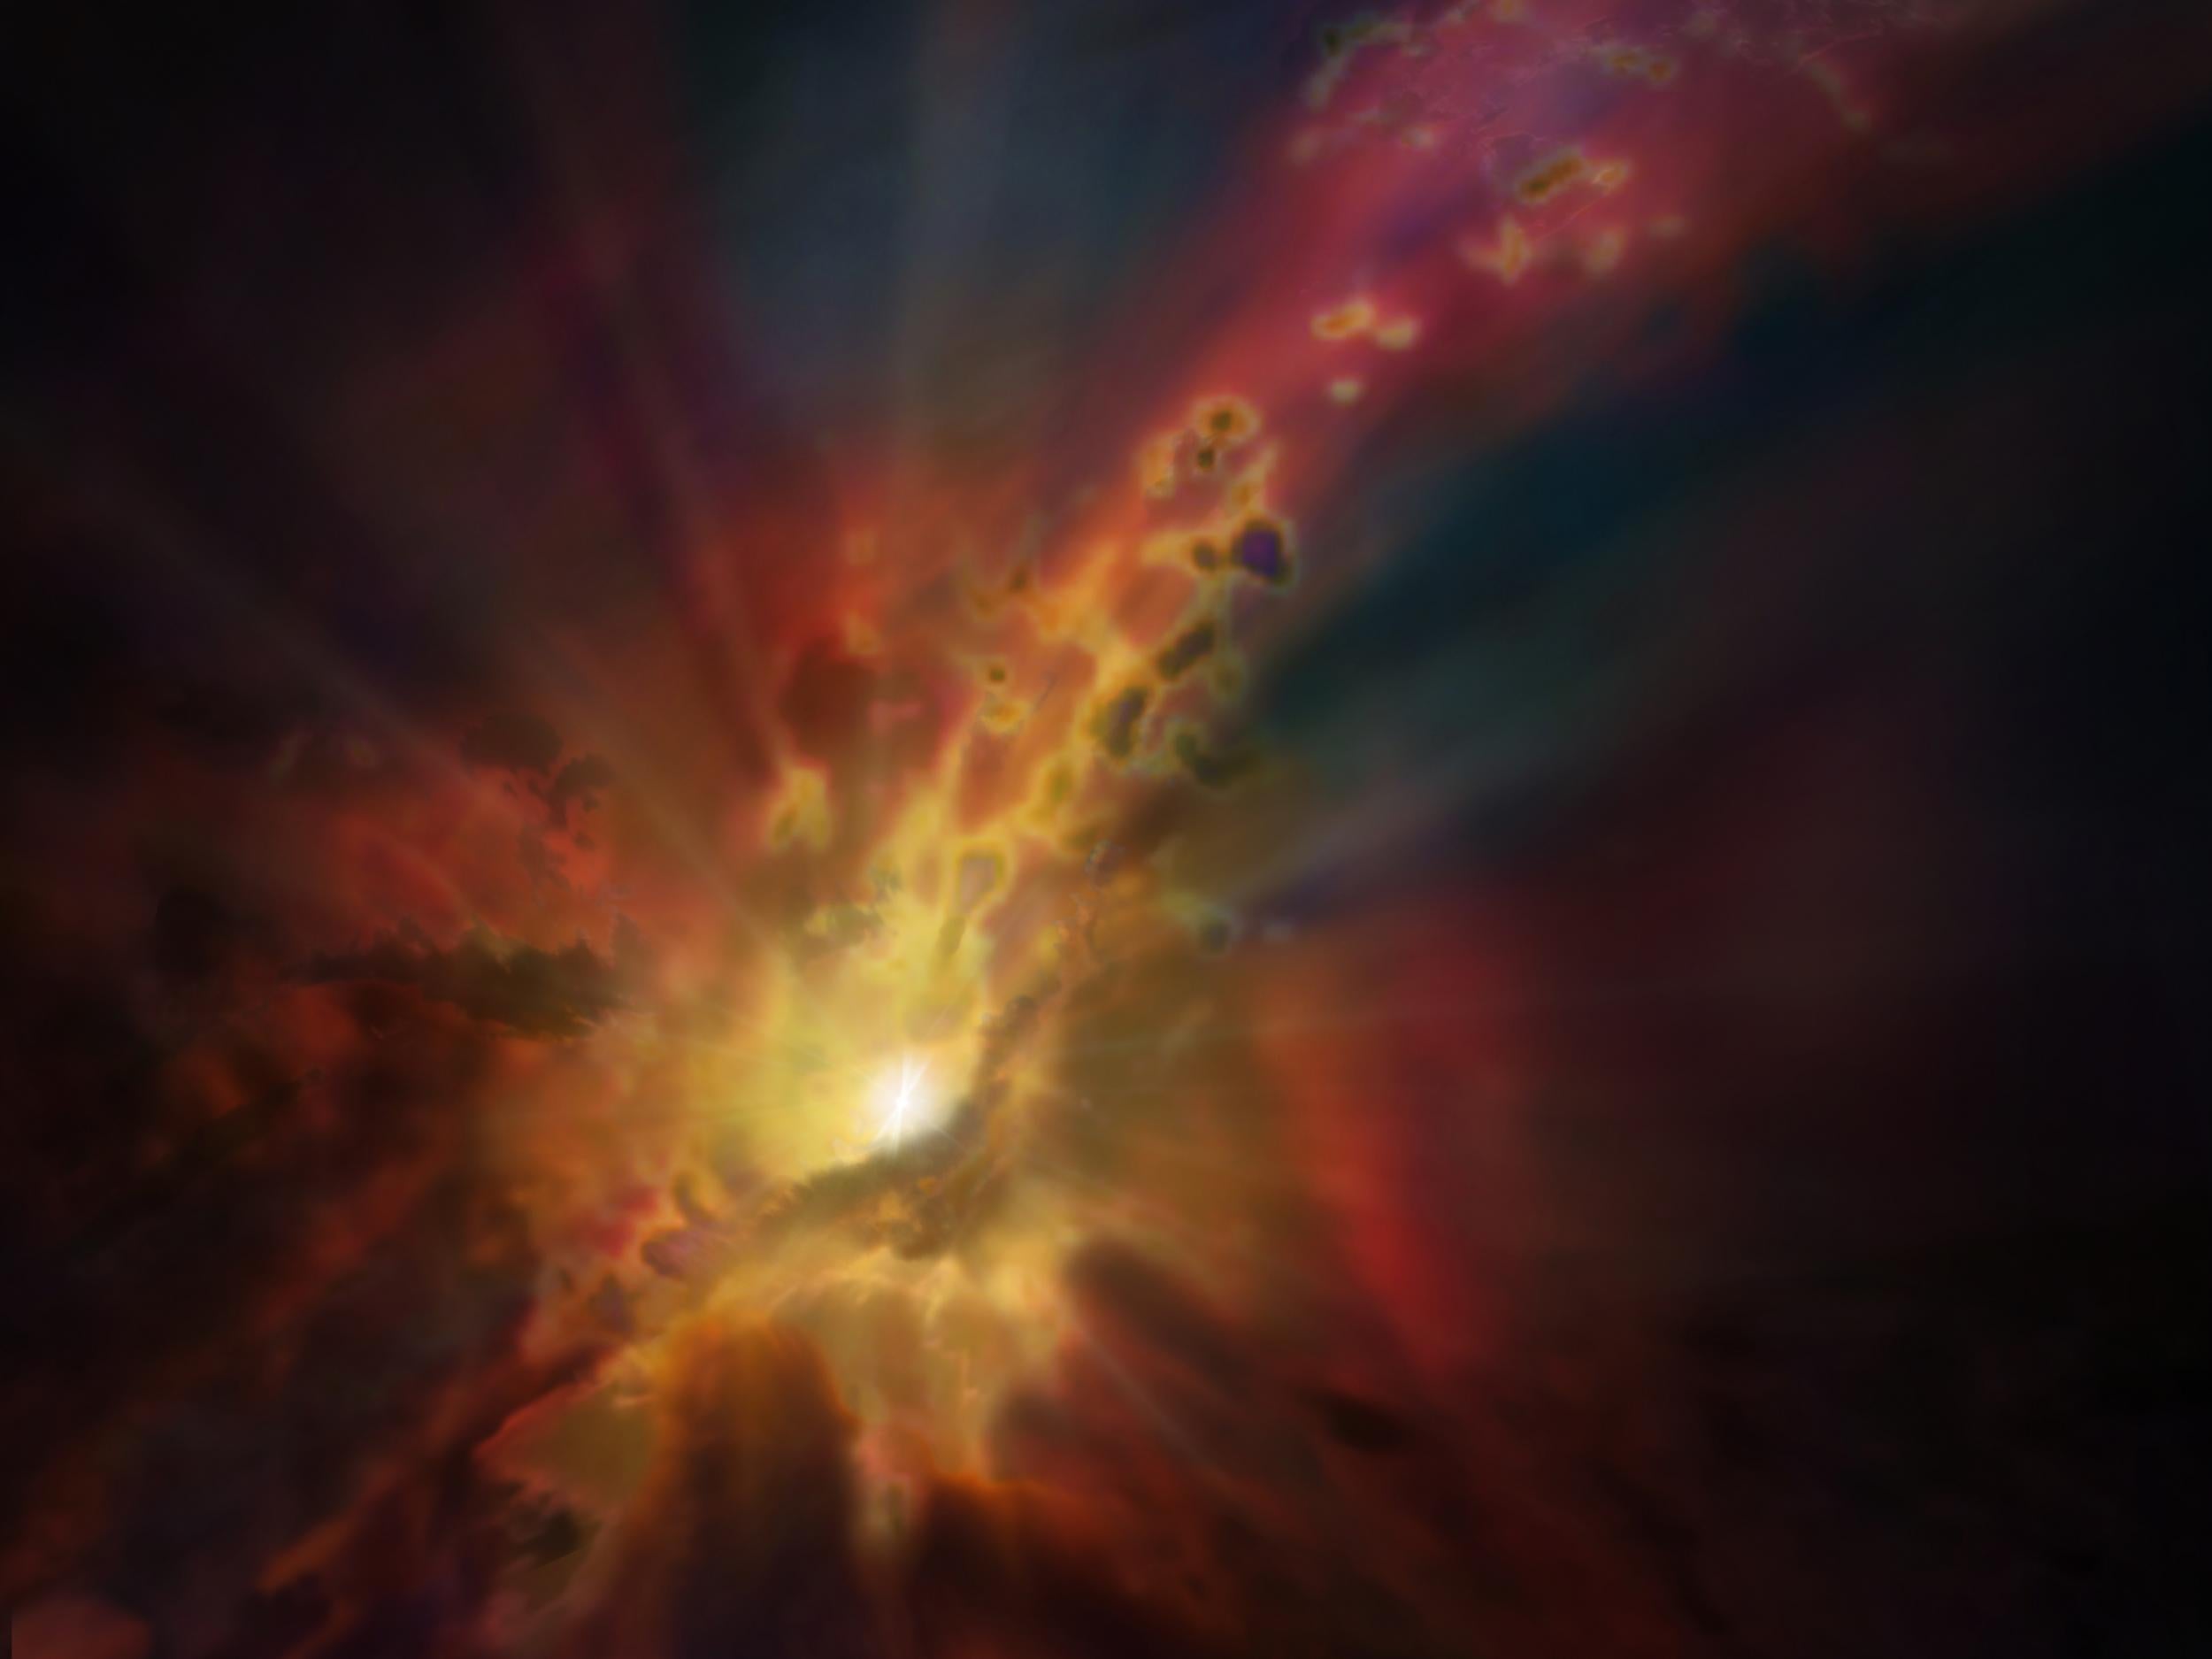 Artist's impression showing an outflow of molecular gas, or 'galactic wind', from an active star-forming galaxy